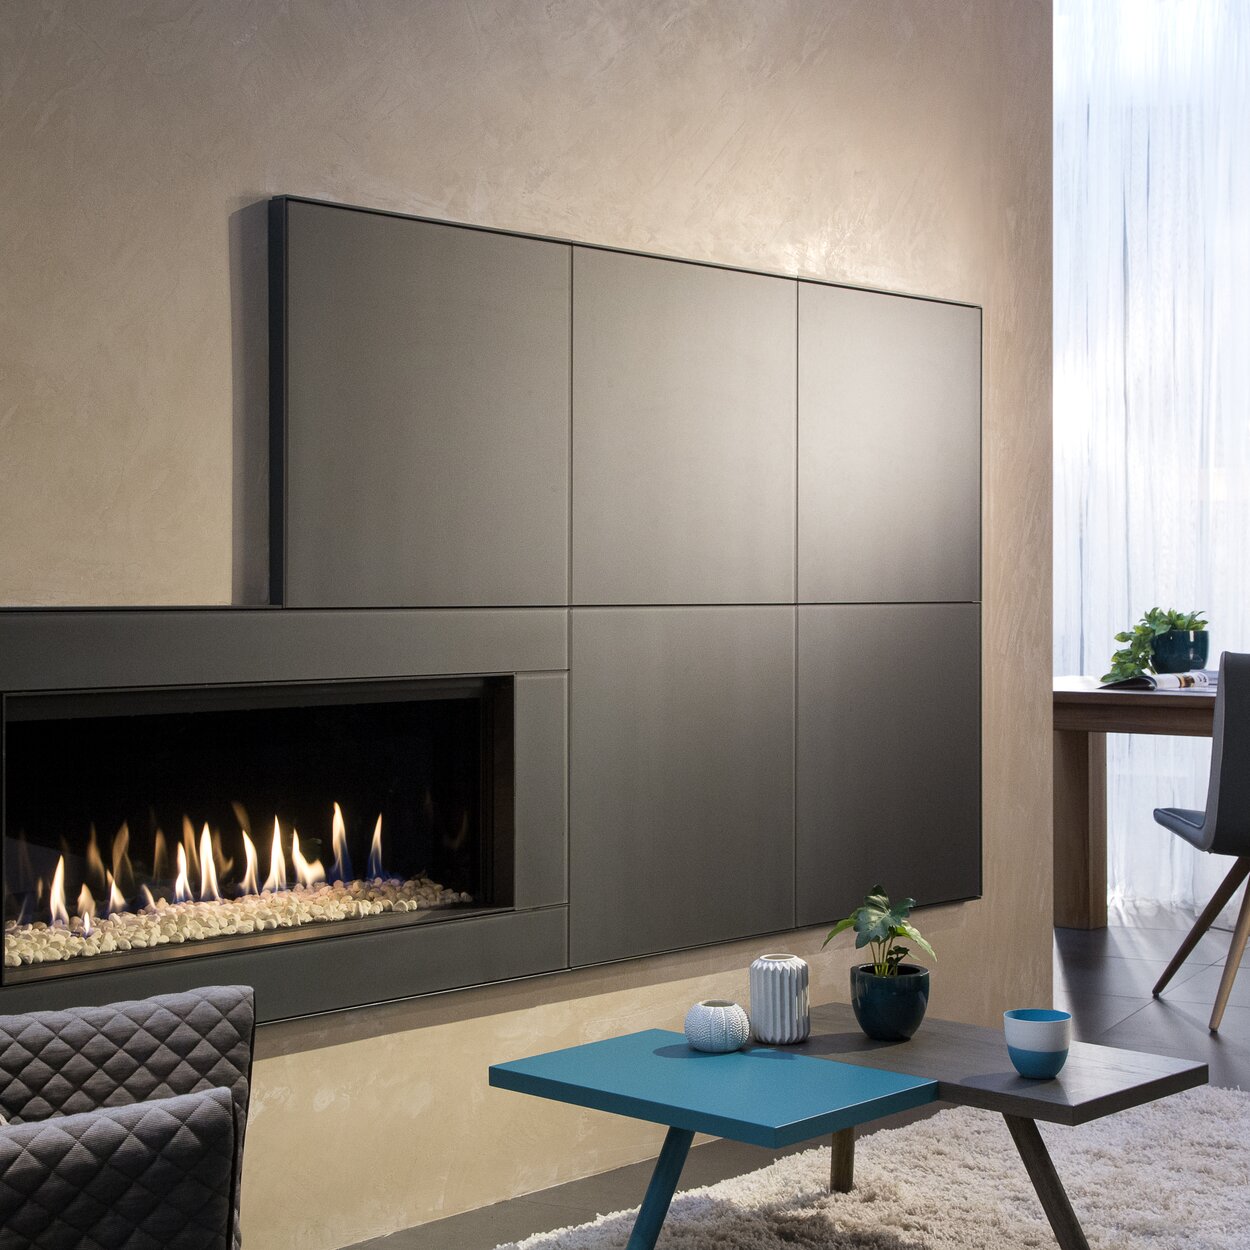 Gas fireplace G100/41F by Kalfire with white stones in the firebox in a built-in furniture element in a modern flat in copper colours